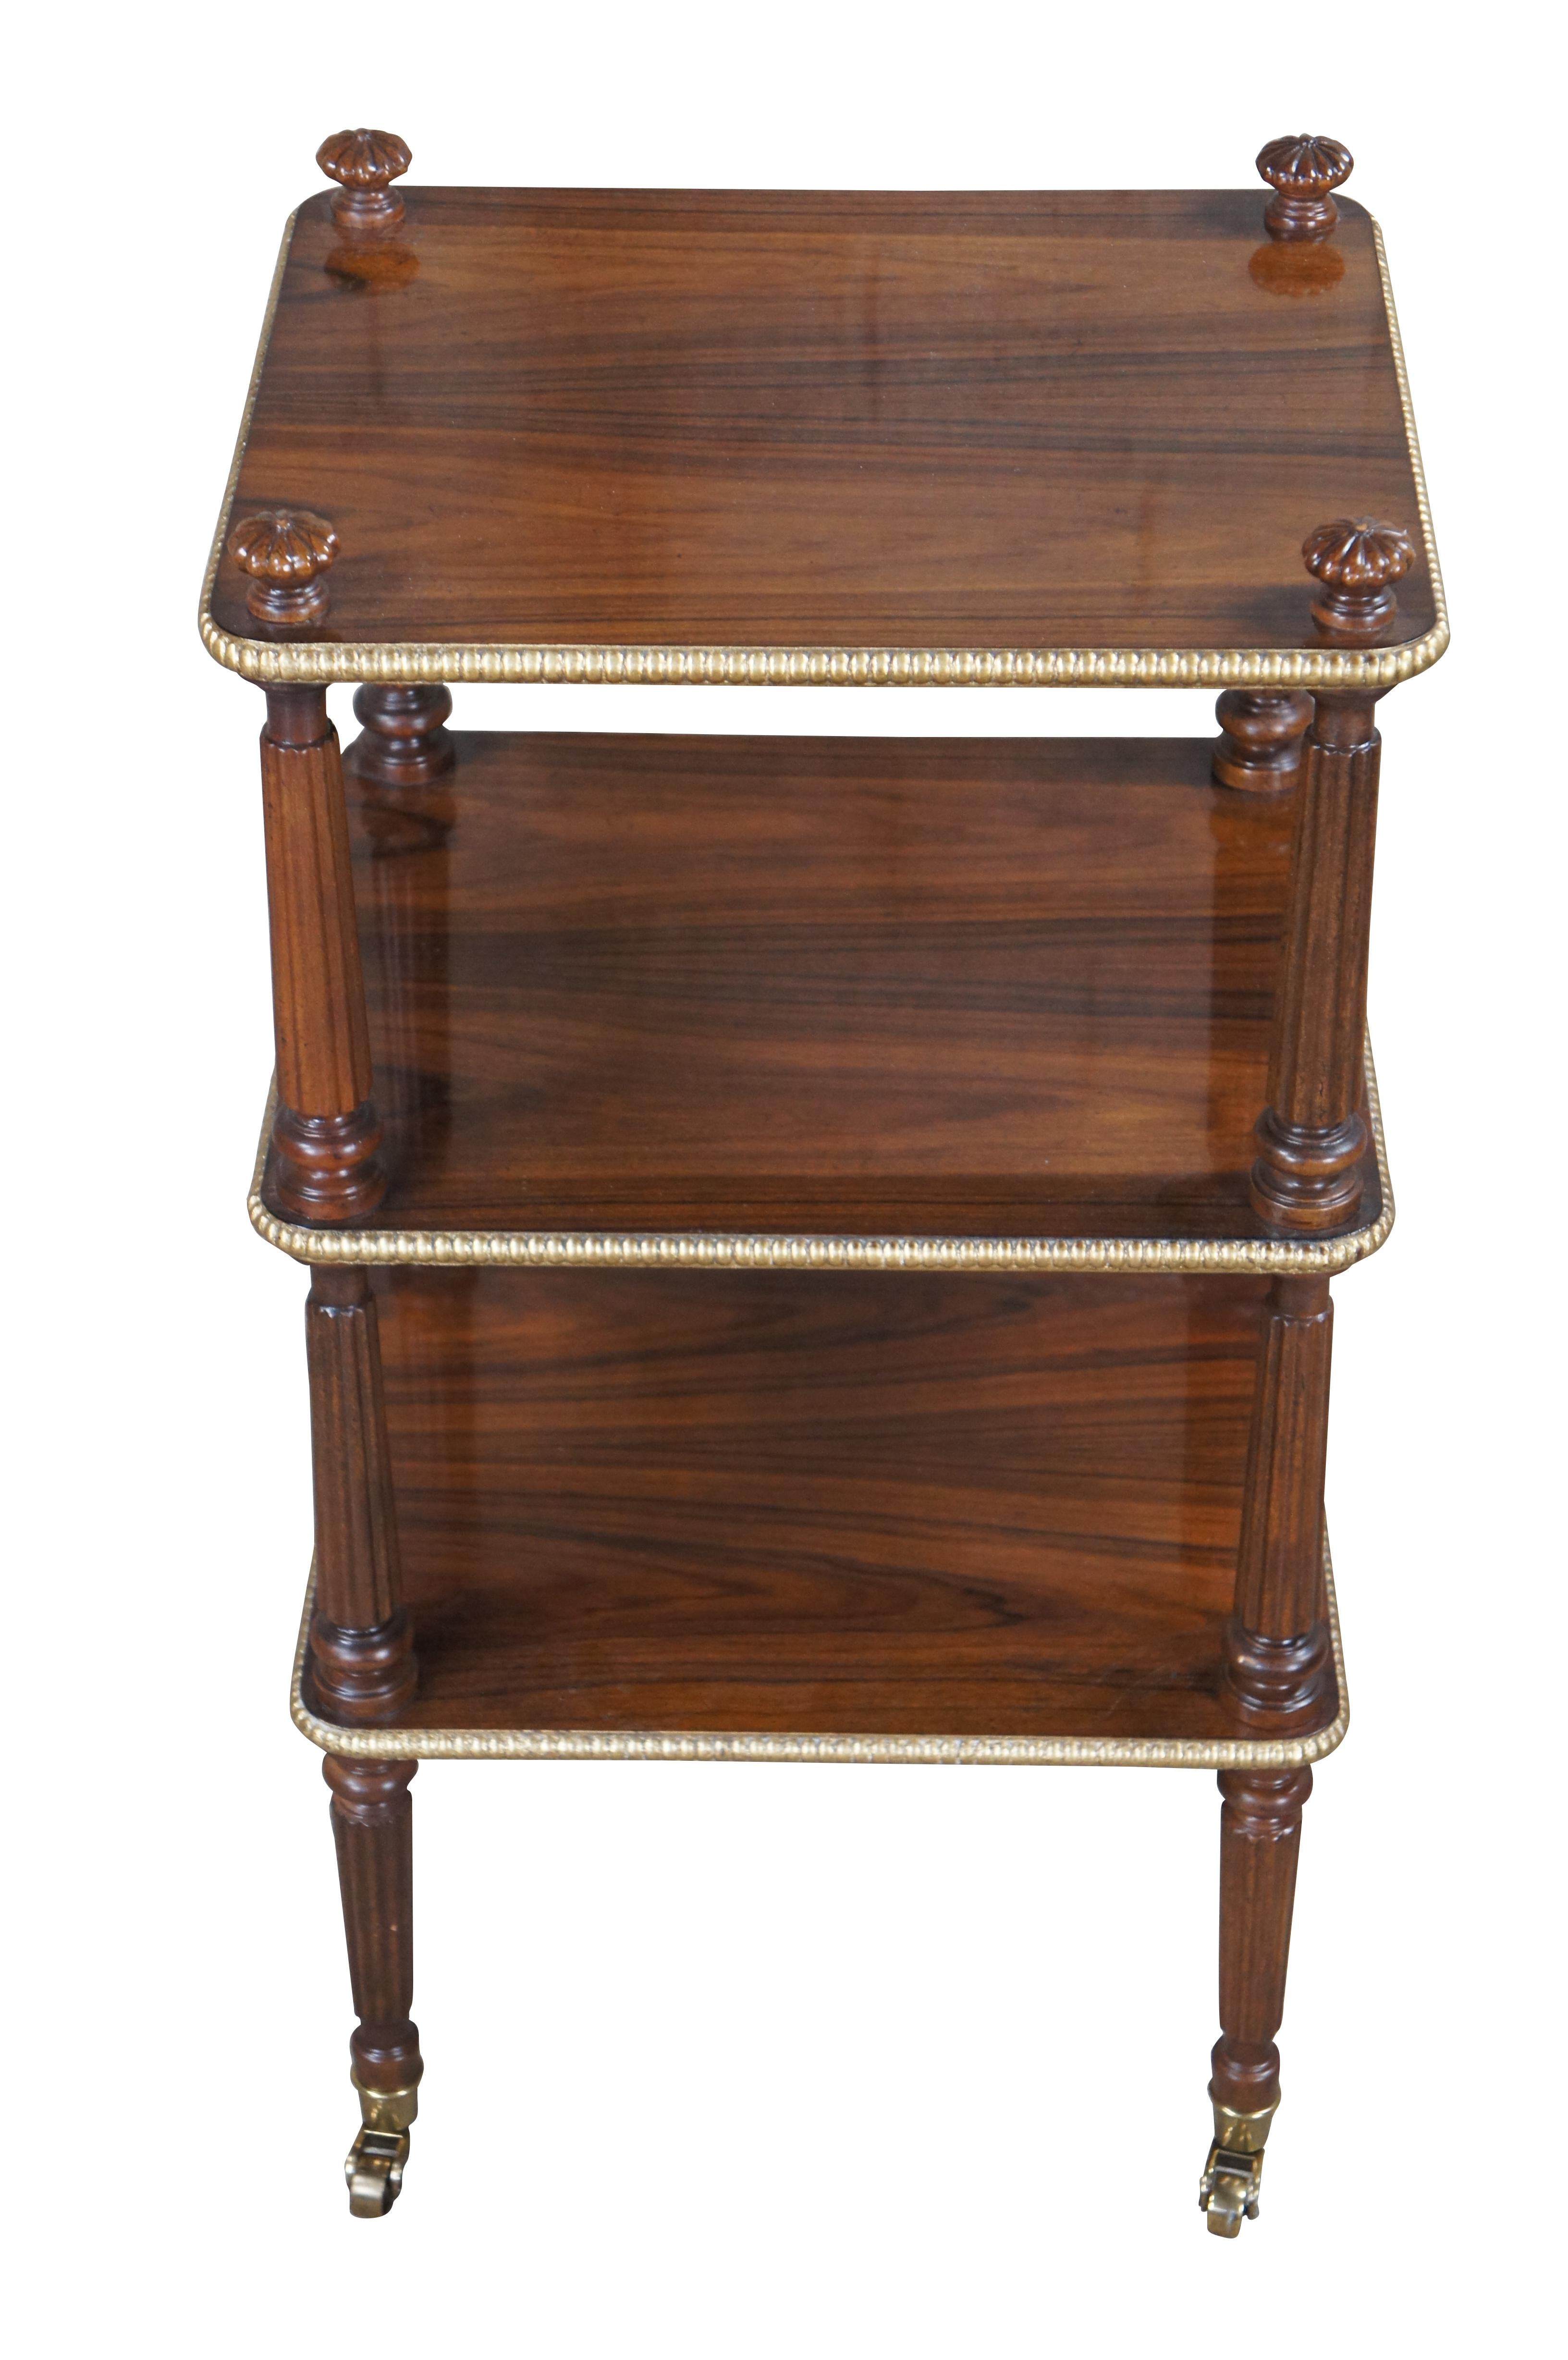 Vintage Baker Stately Homes Collection bar cart, side table or stand.  Made of rosewood featuring tiered design with gilded gadrooned edges, turned and fluted columns, ornate finials and brass castors.

The Stately Homes Collection by Baker